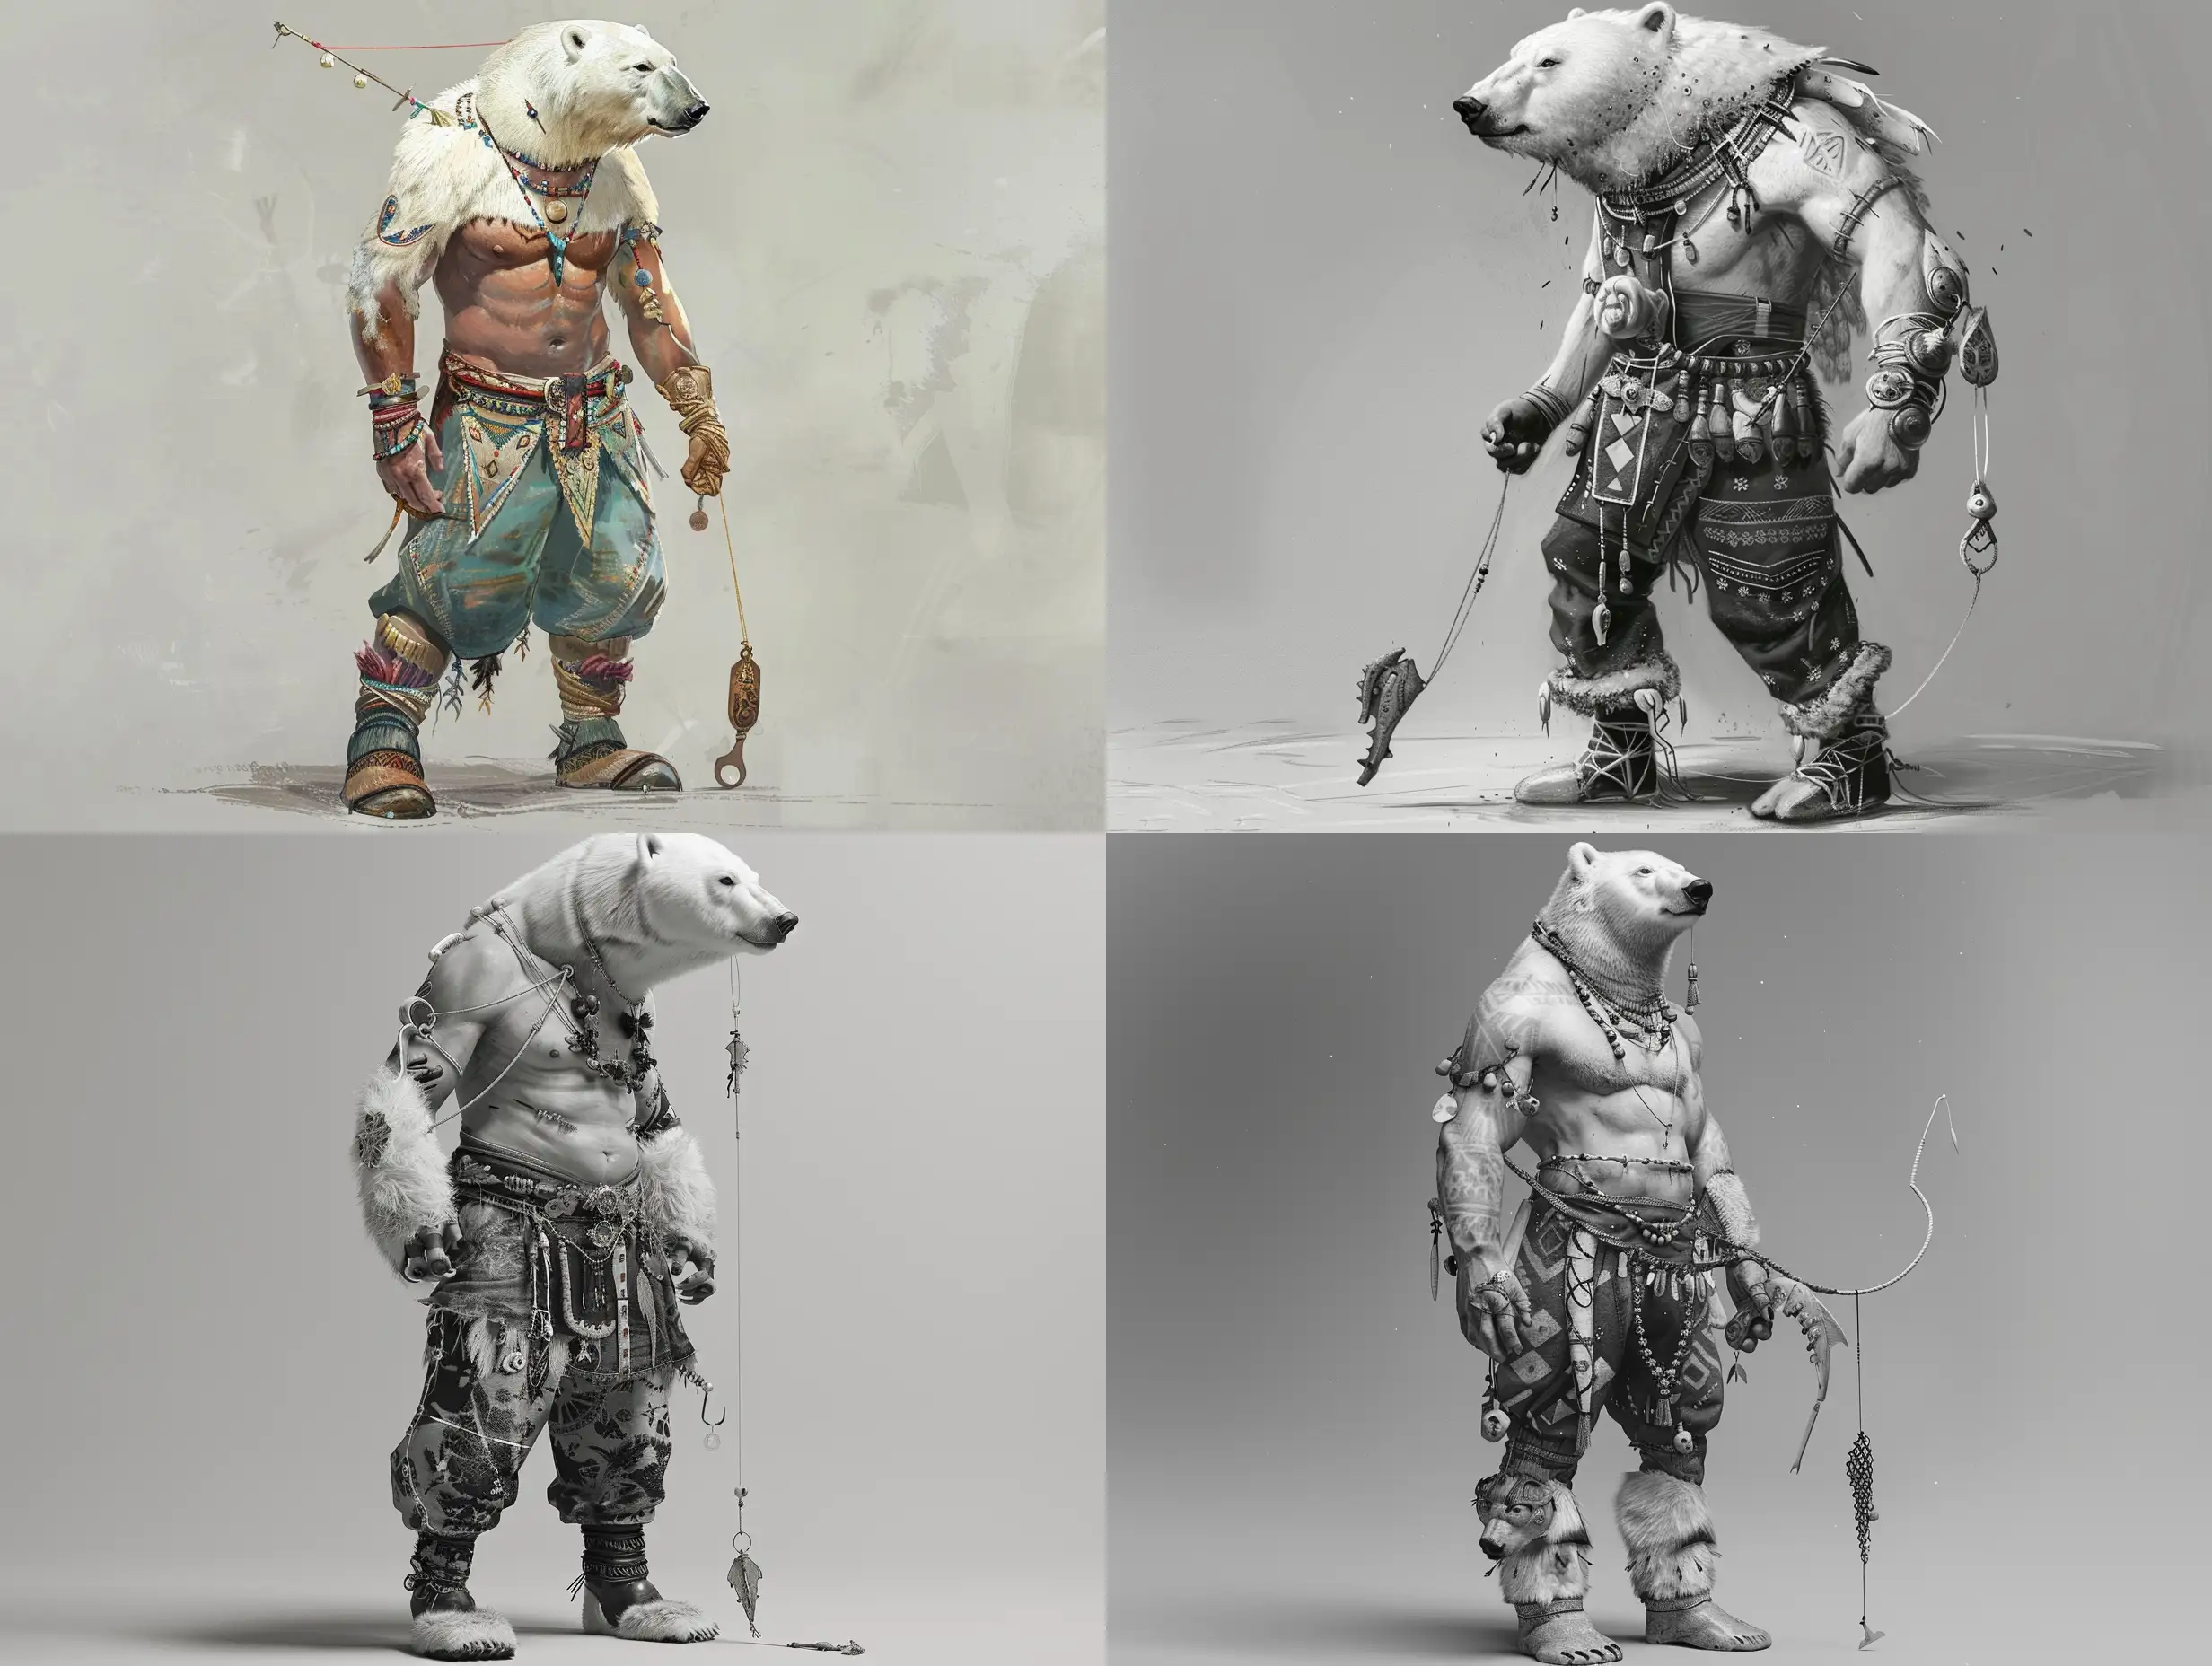 I need to generate a older demigod. His head is that of a polar bear but a human body. He is a lean but strong figure. He is an amputee missing his right arm. He wears traditional Inuit pants and boots with lots of traditional details and charms, with a shaman aesthetic. He carries a string with a hand-carved fish-hook on it. There is an intensity and a confidence in his posture.